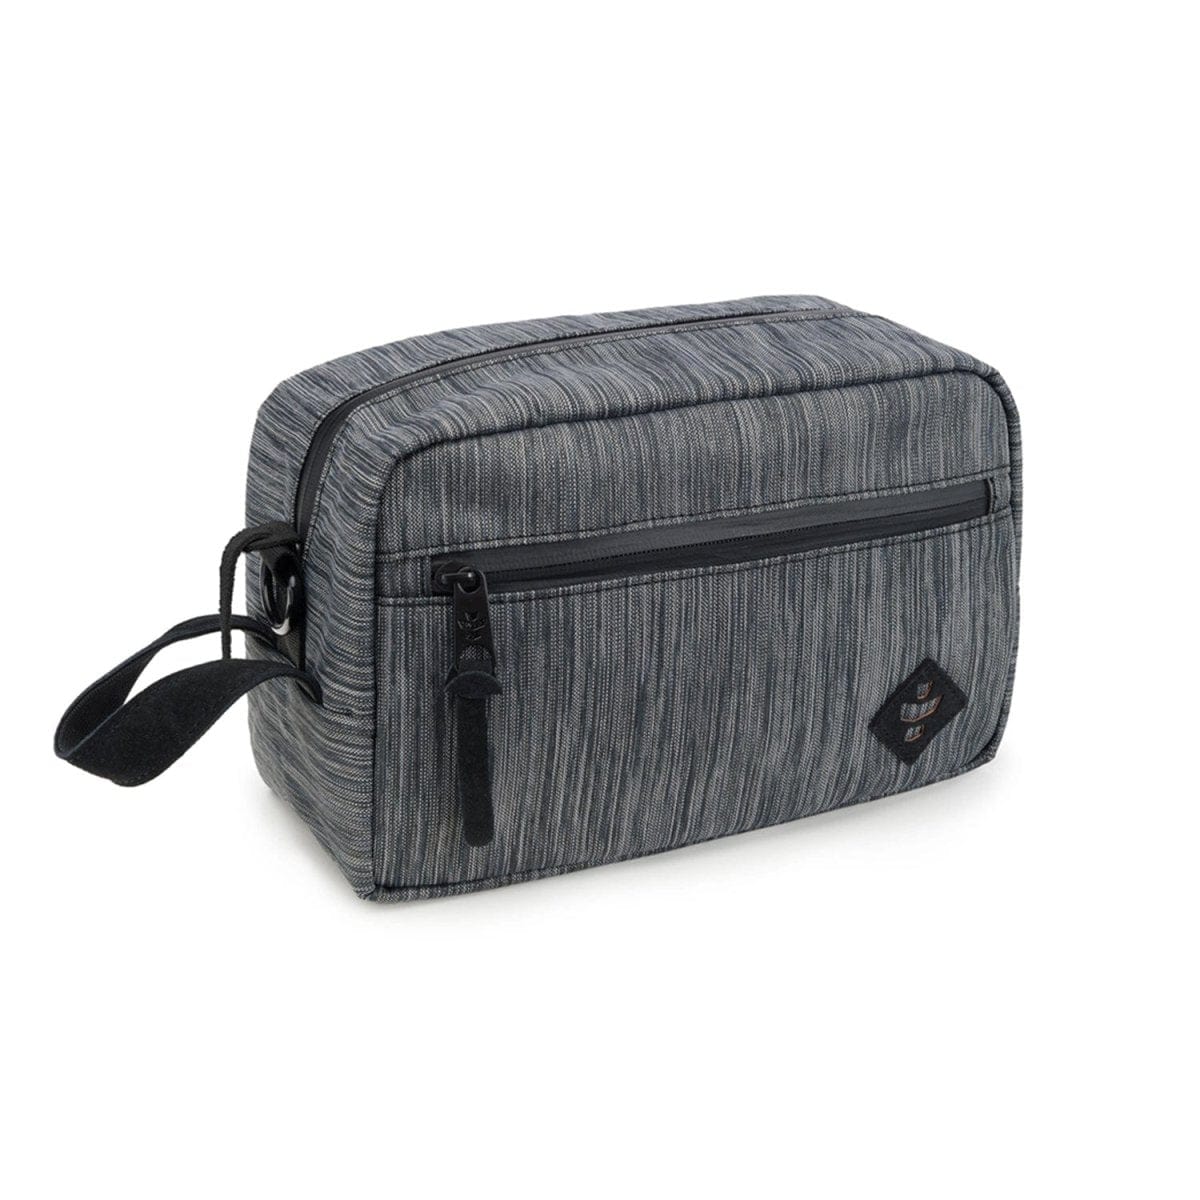 Revelry Supply Travel Bag Striped Dark Grey The Stowaway - Smell Proof Toiletry Kit